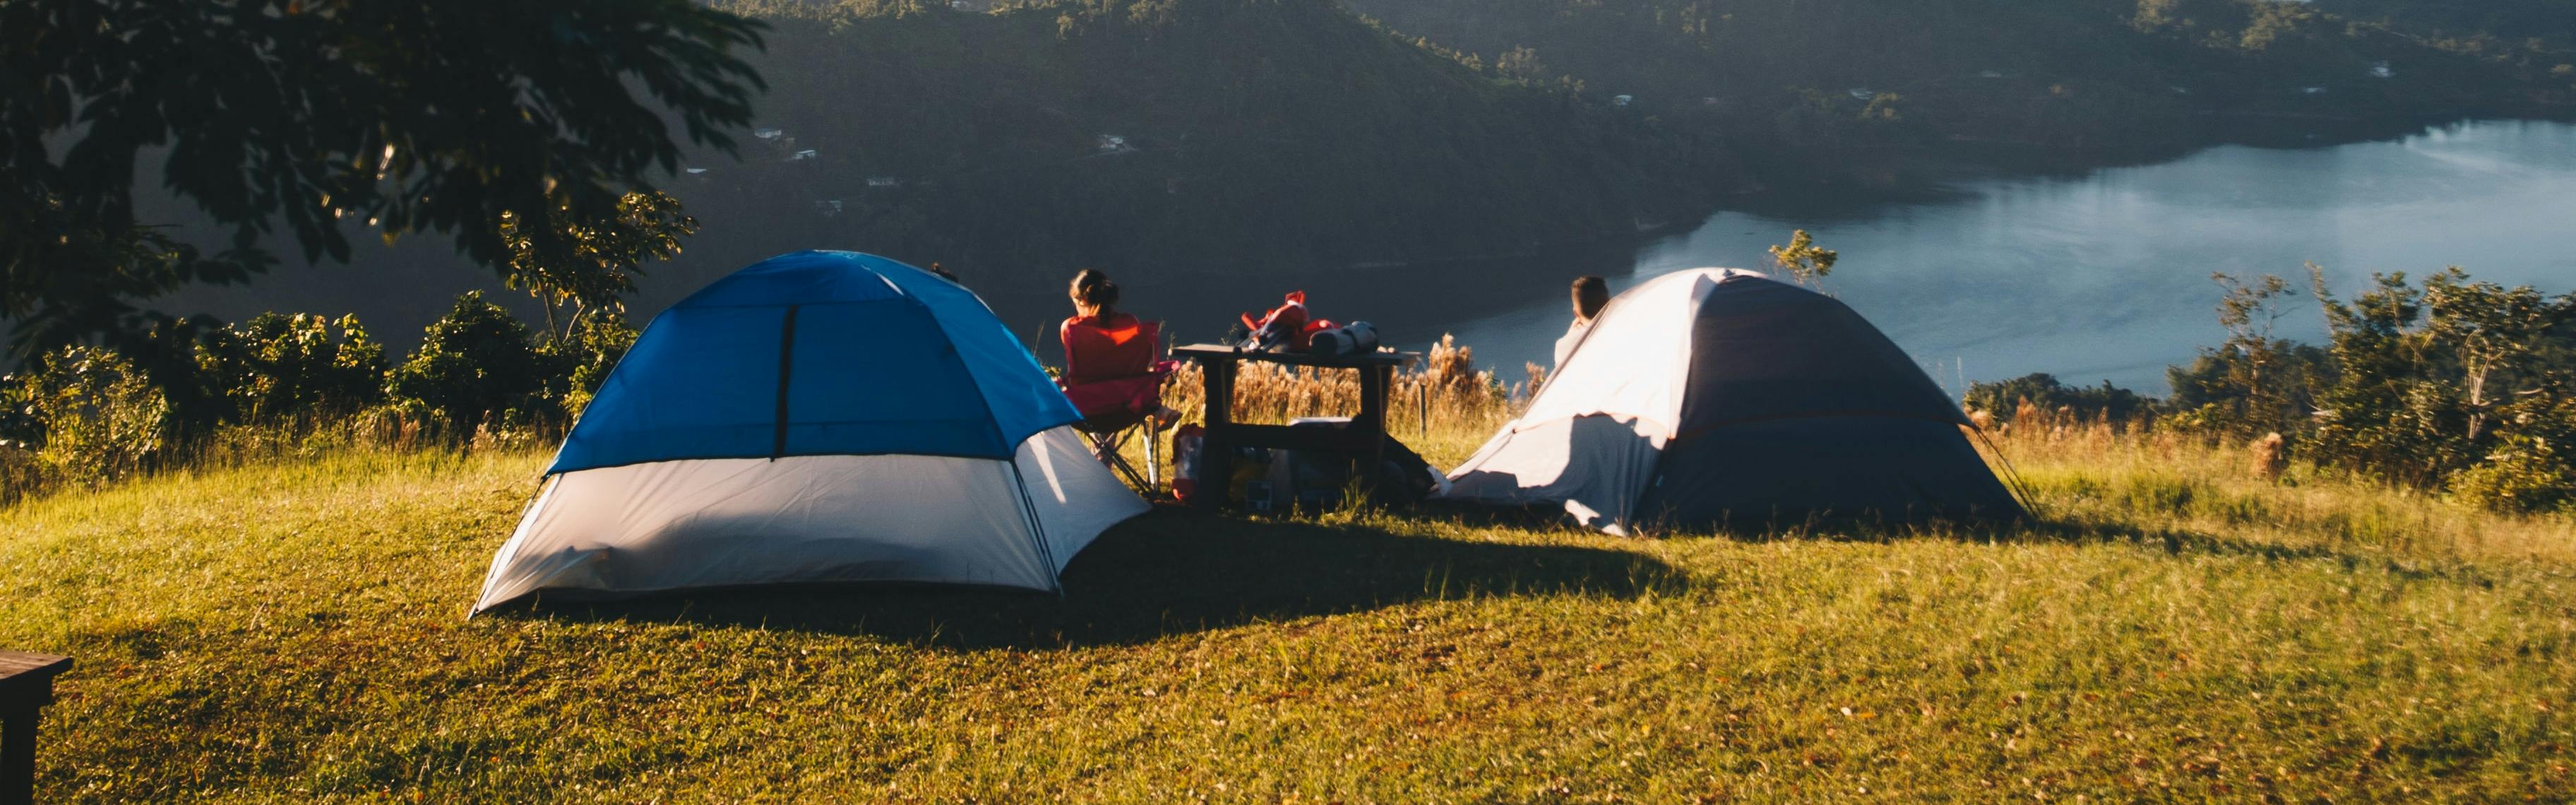 Two tents are set up on a grassy hill with people sitting at a set of tables outside them